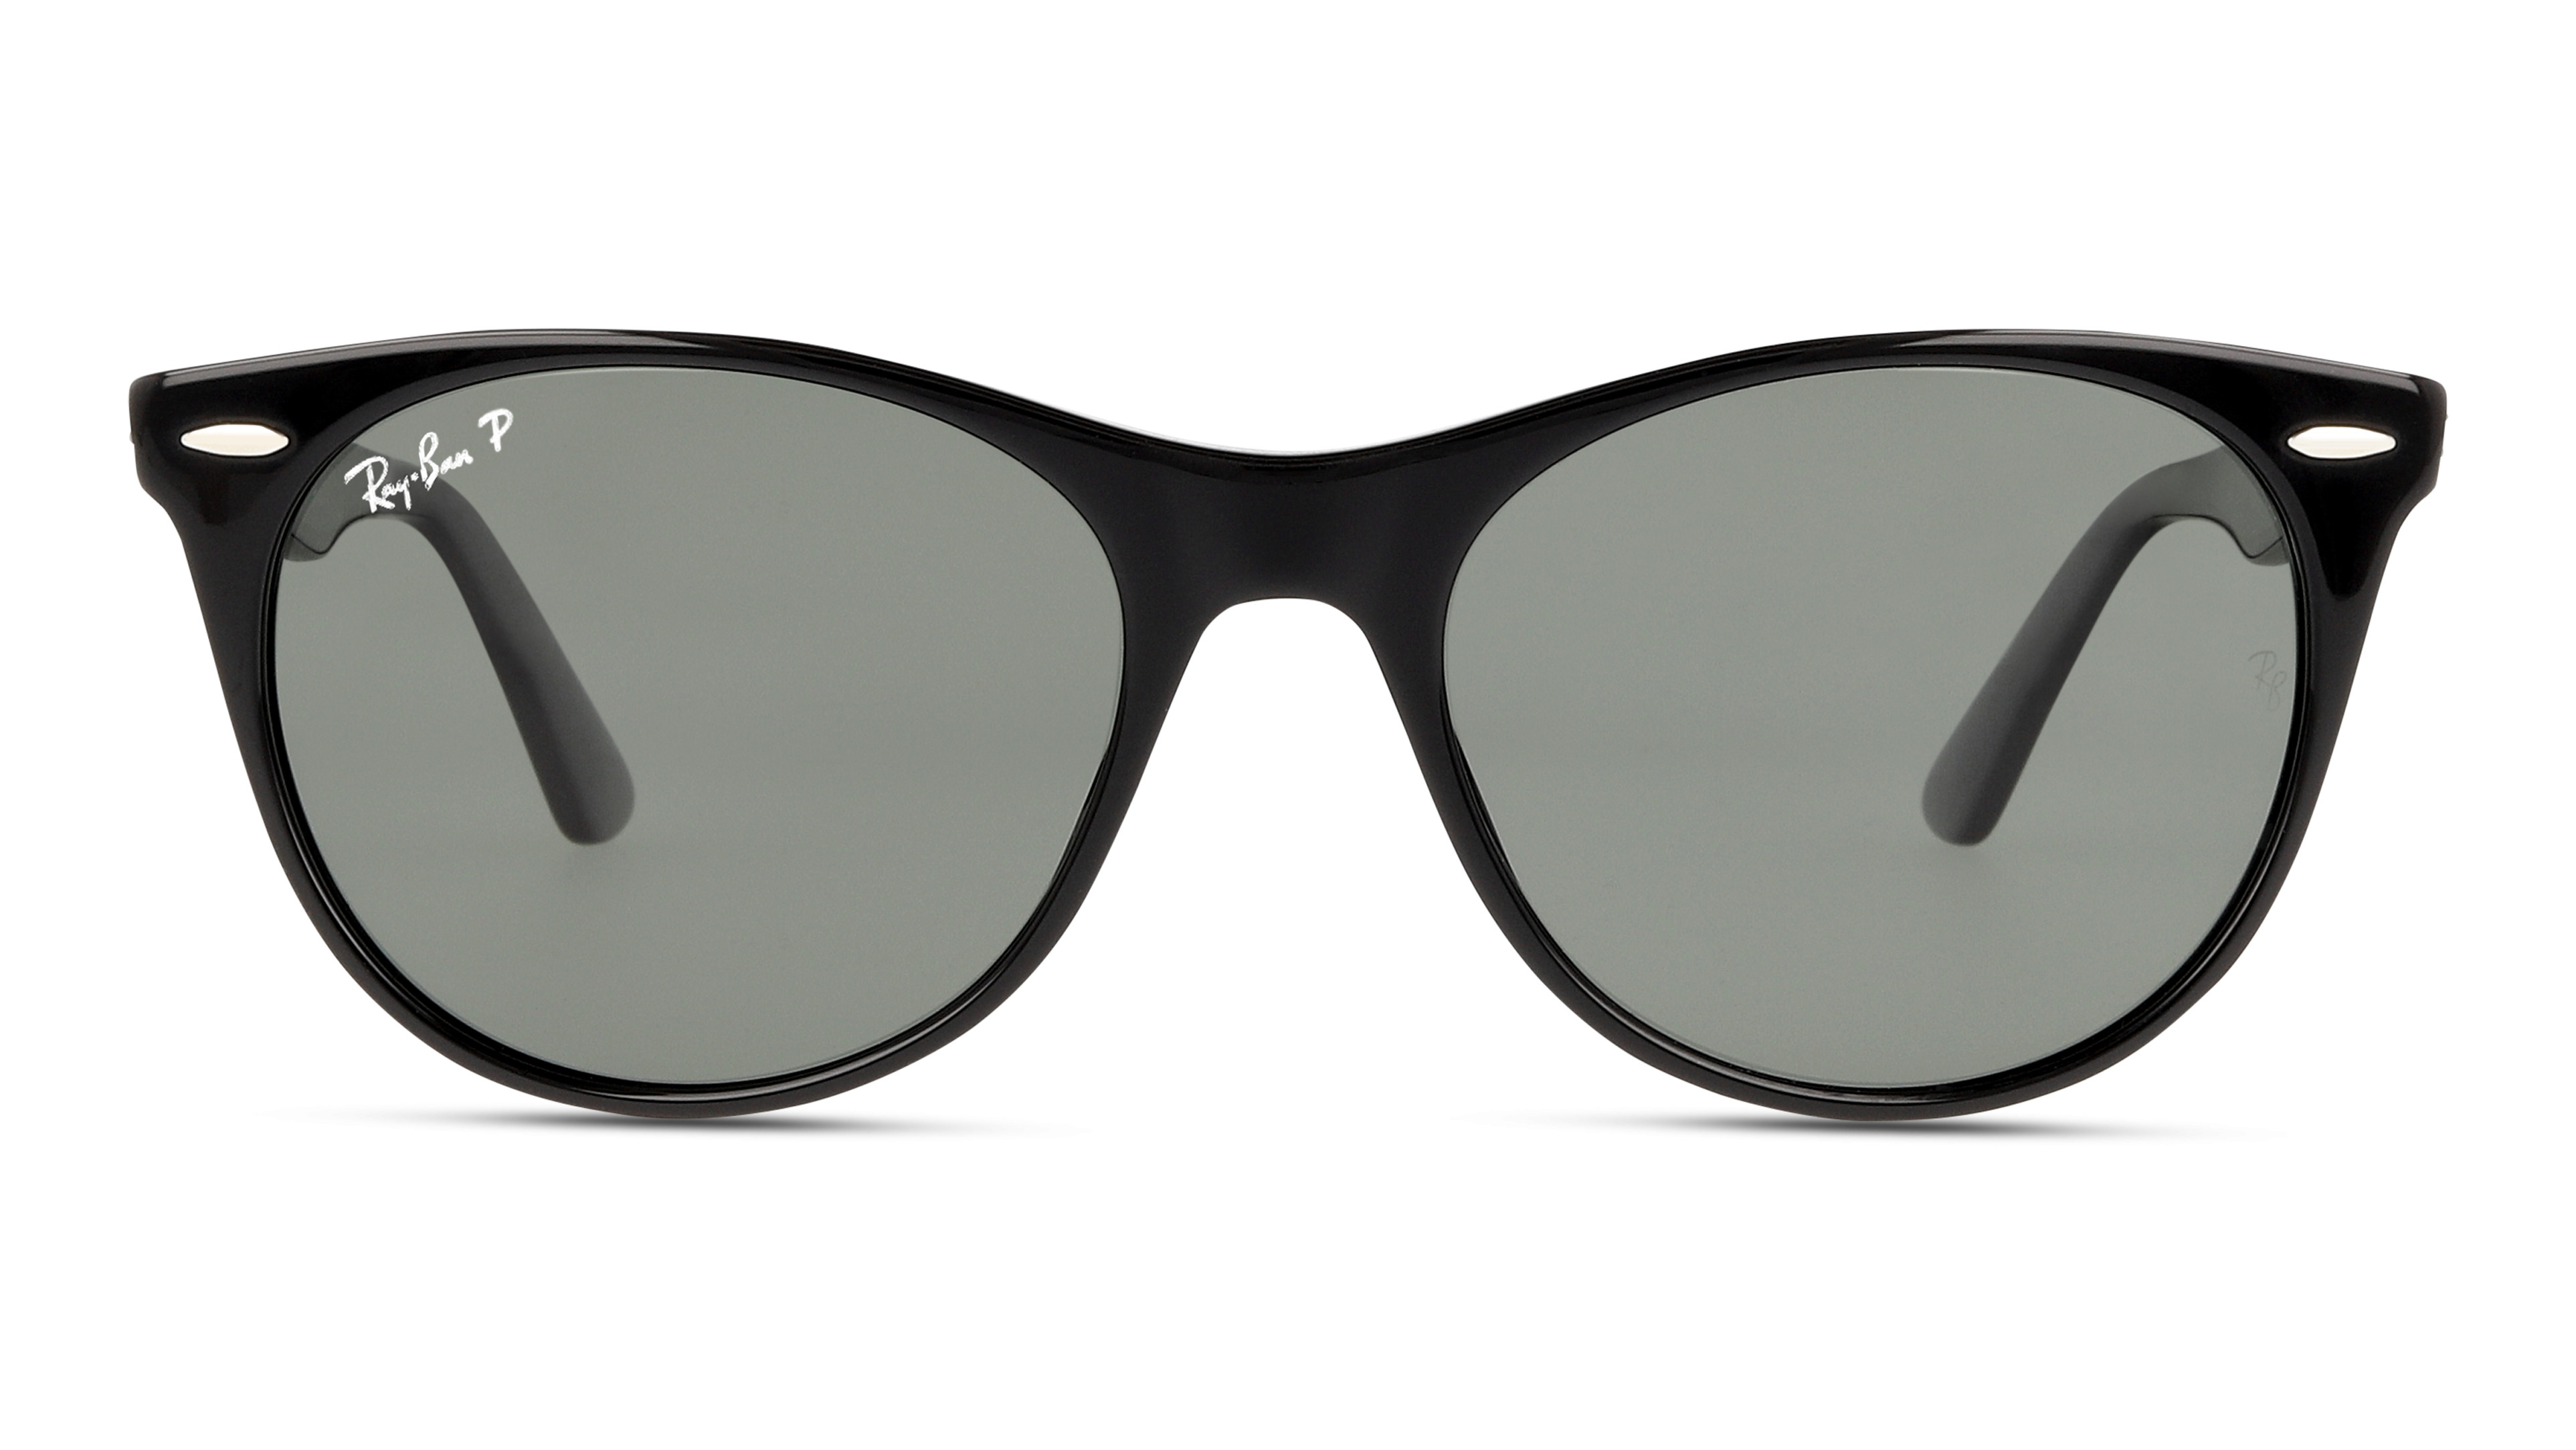 [products.image.front] Ray-Ban WAYFARER II 0RB2185 901/58 Sonnenbrille